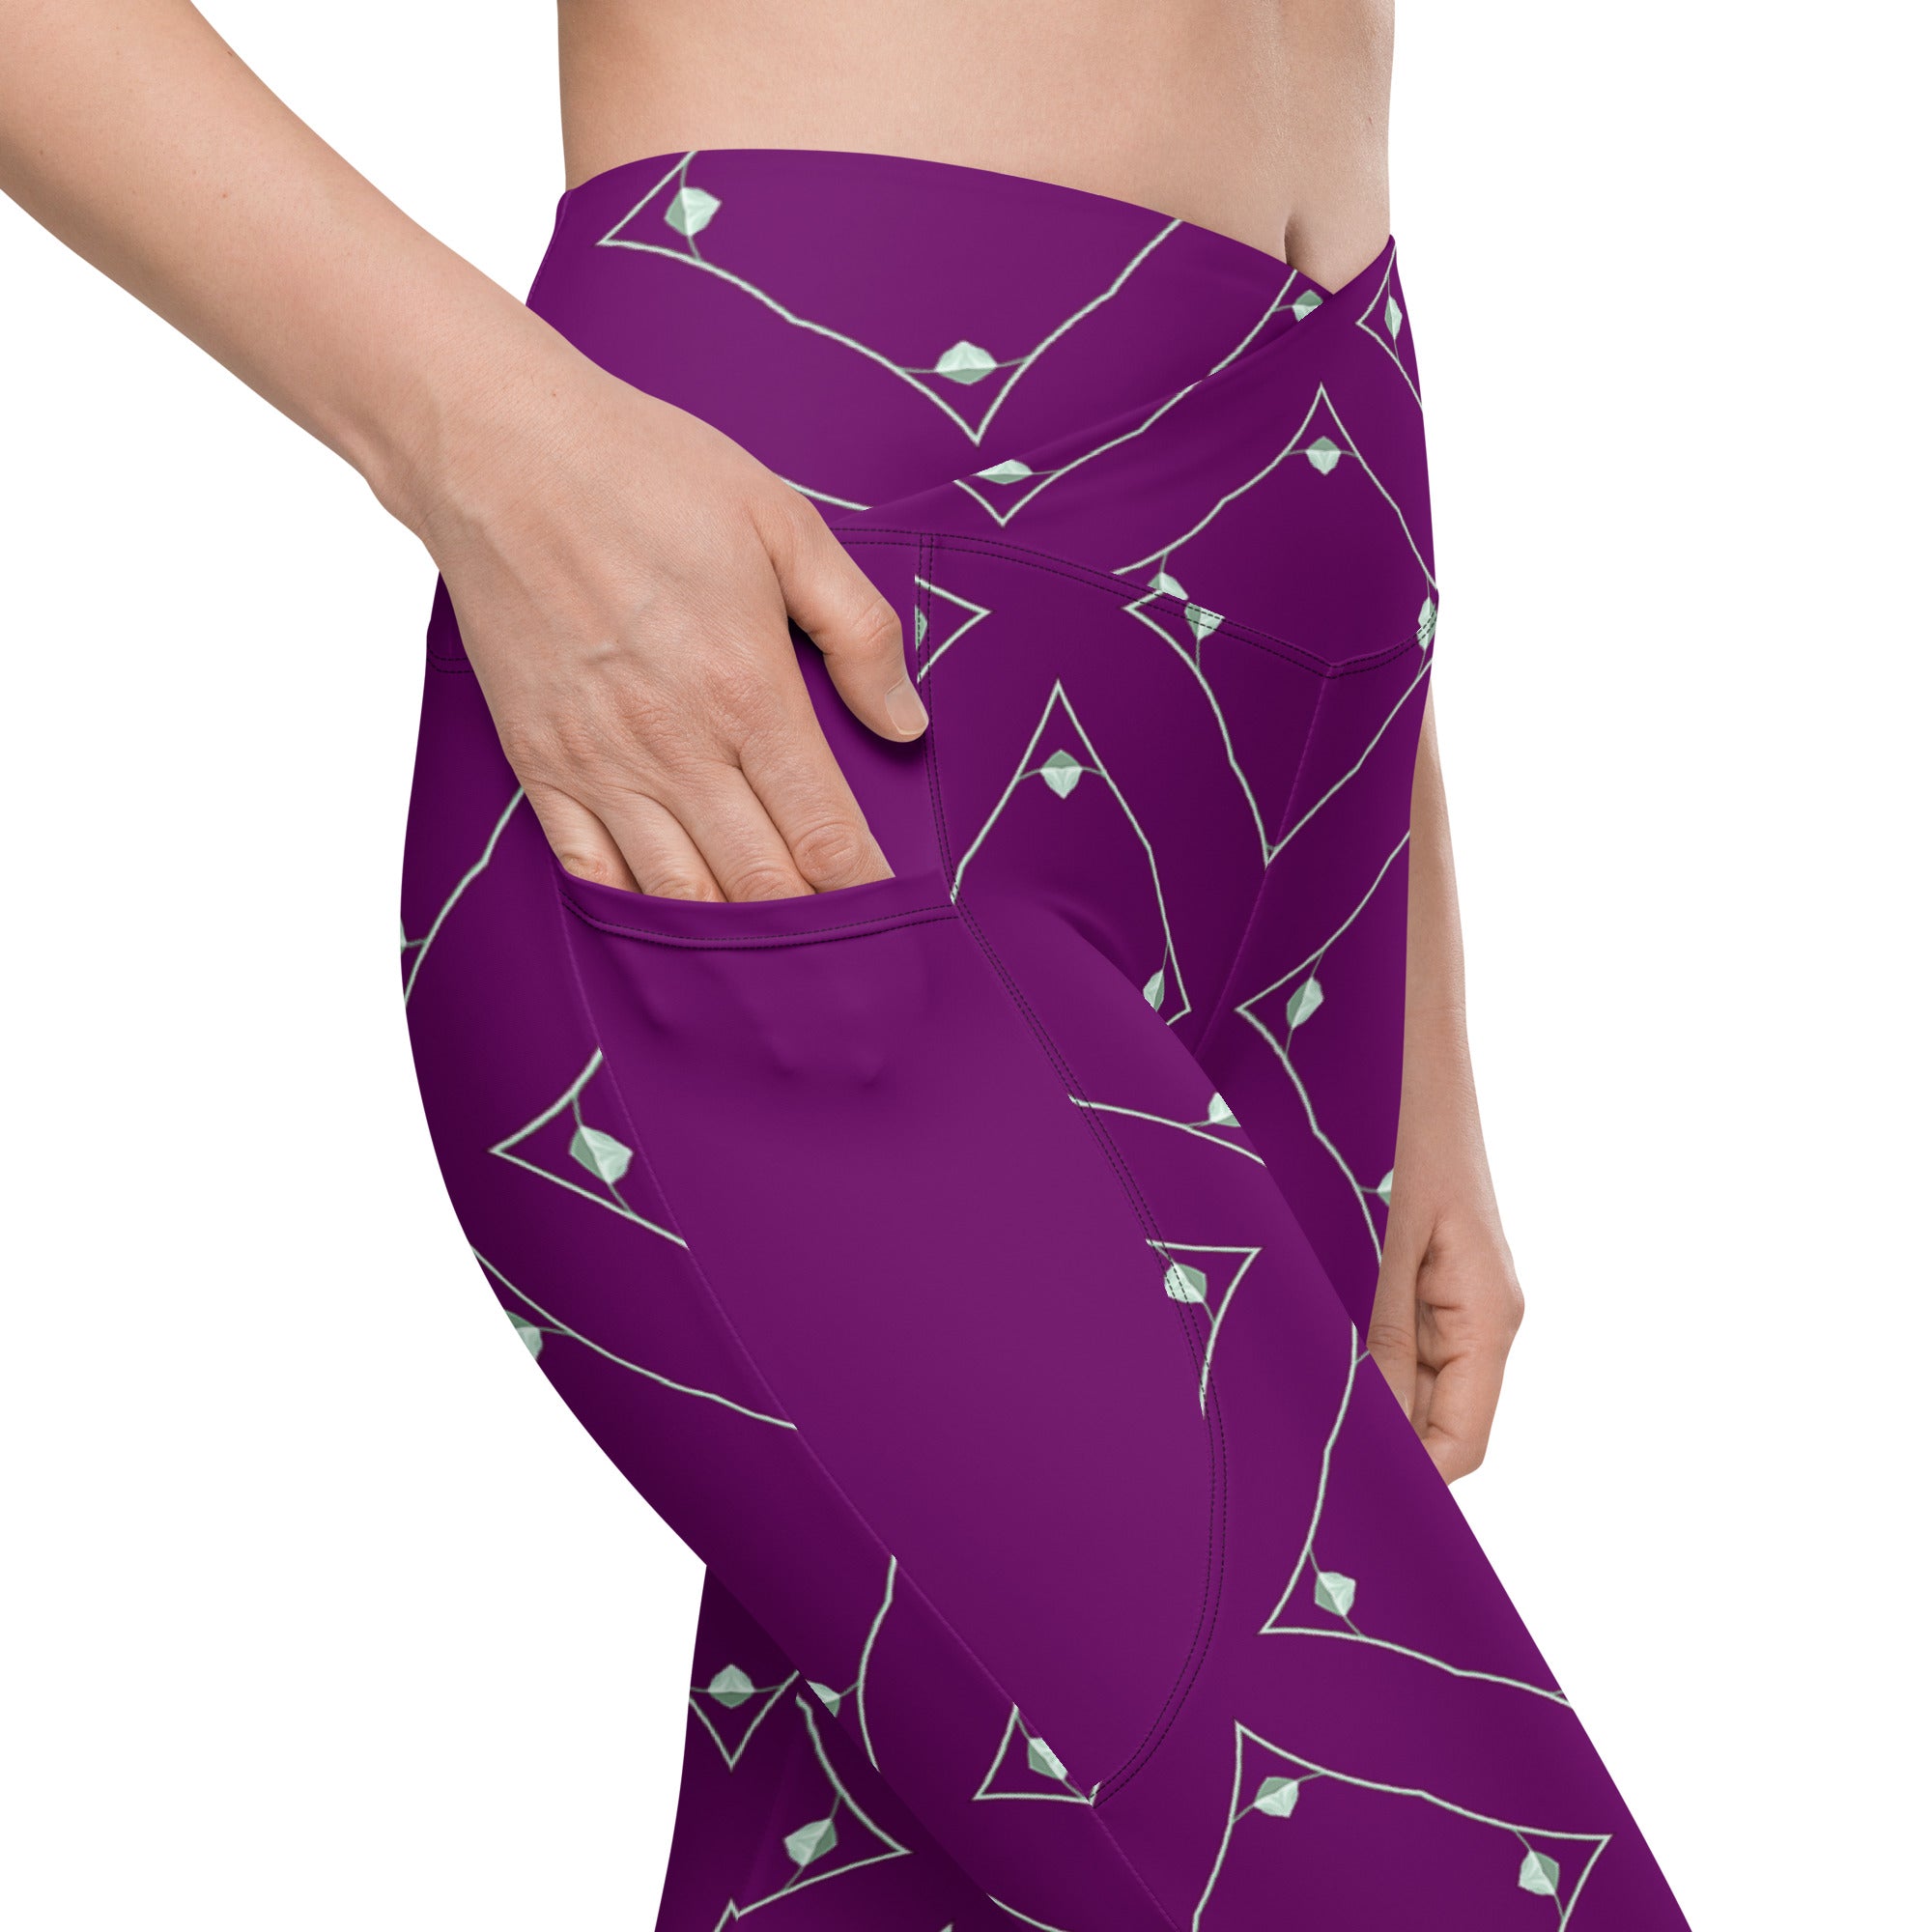 Comfort fit Geometric Bliss leggings with pockets for active wear.